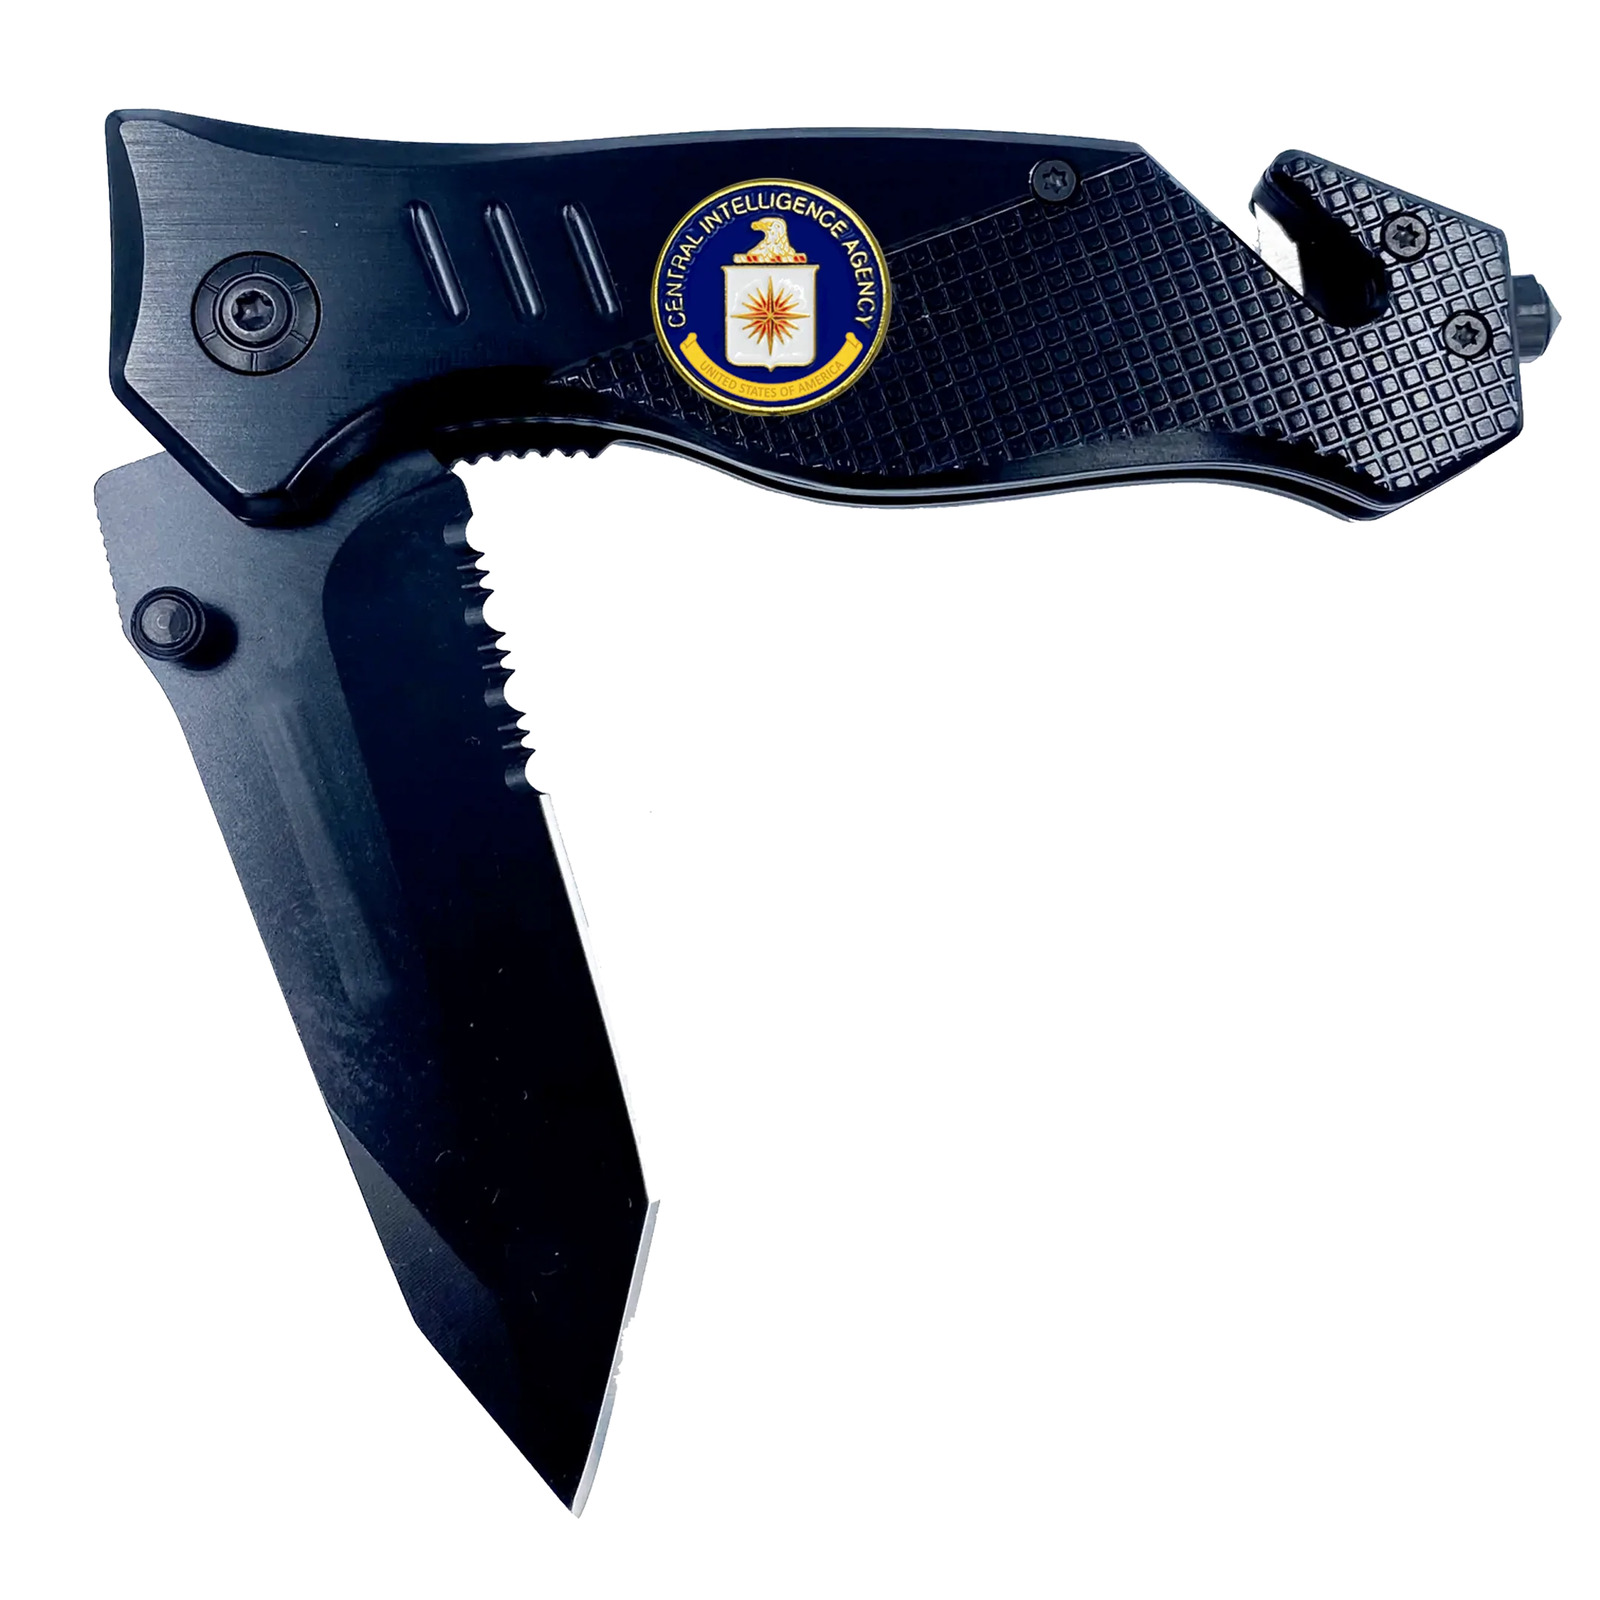 CIA Central Intelligence Agency 3-in-1 Tactical Rescue knife tool with Seatbelt